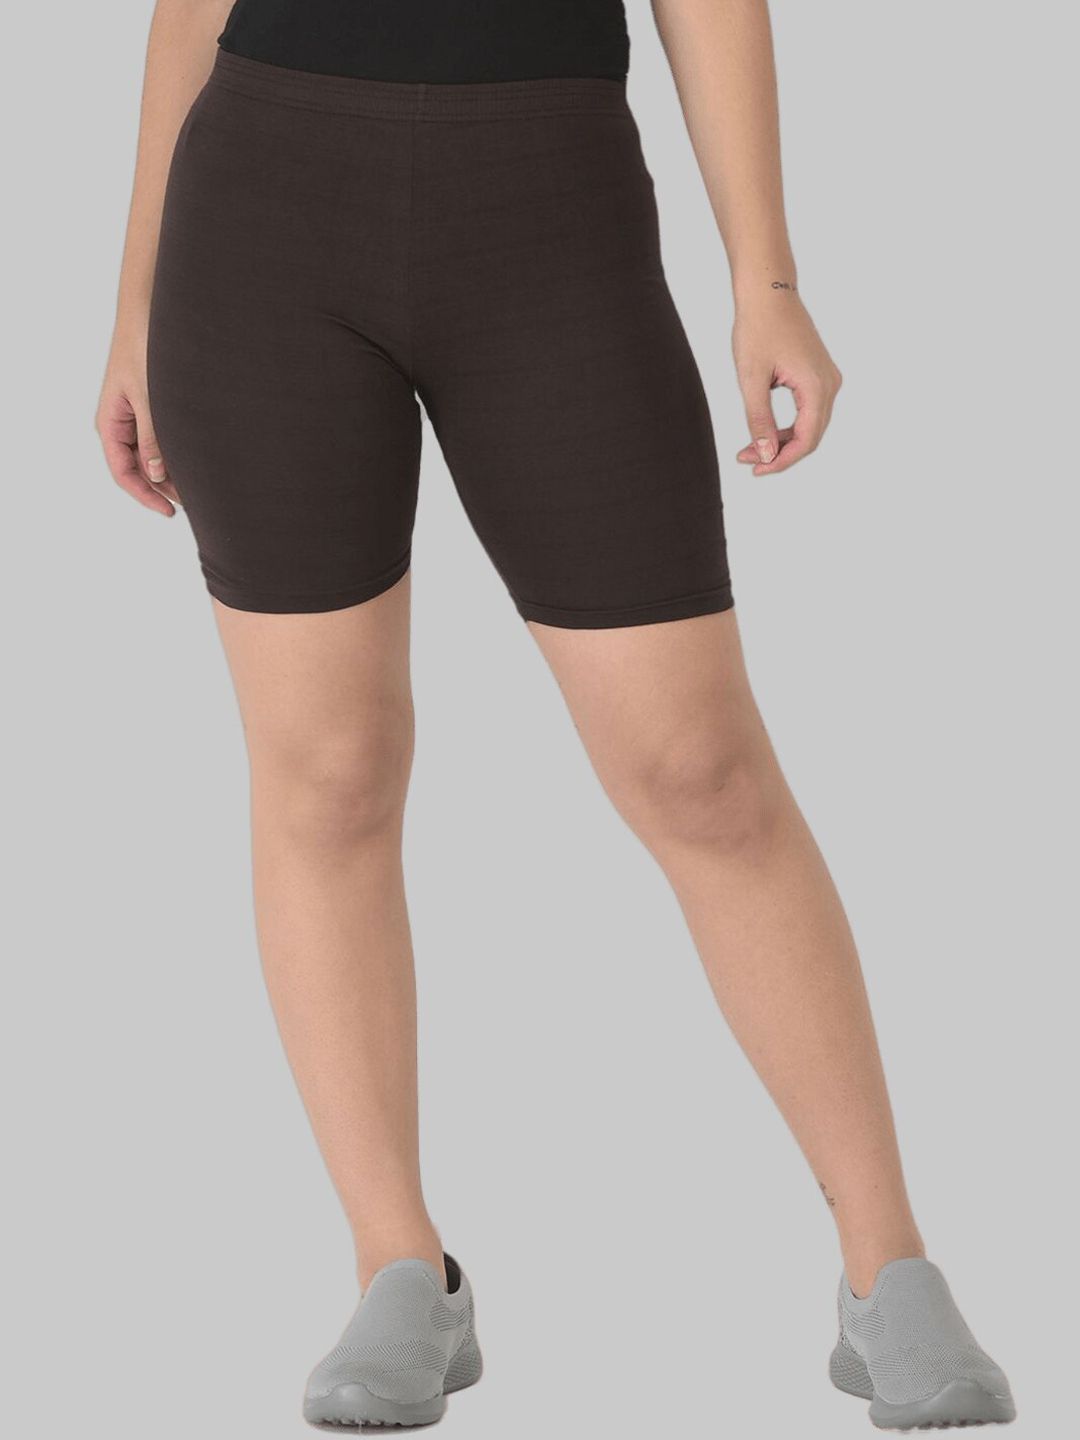 Dollar Missy Women Black Skinny Fit Cycling Sports Shorts Price in India